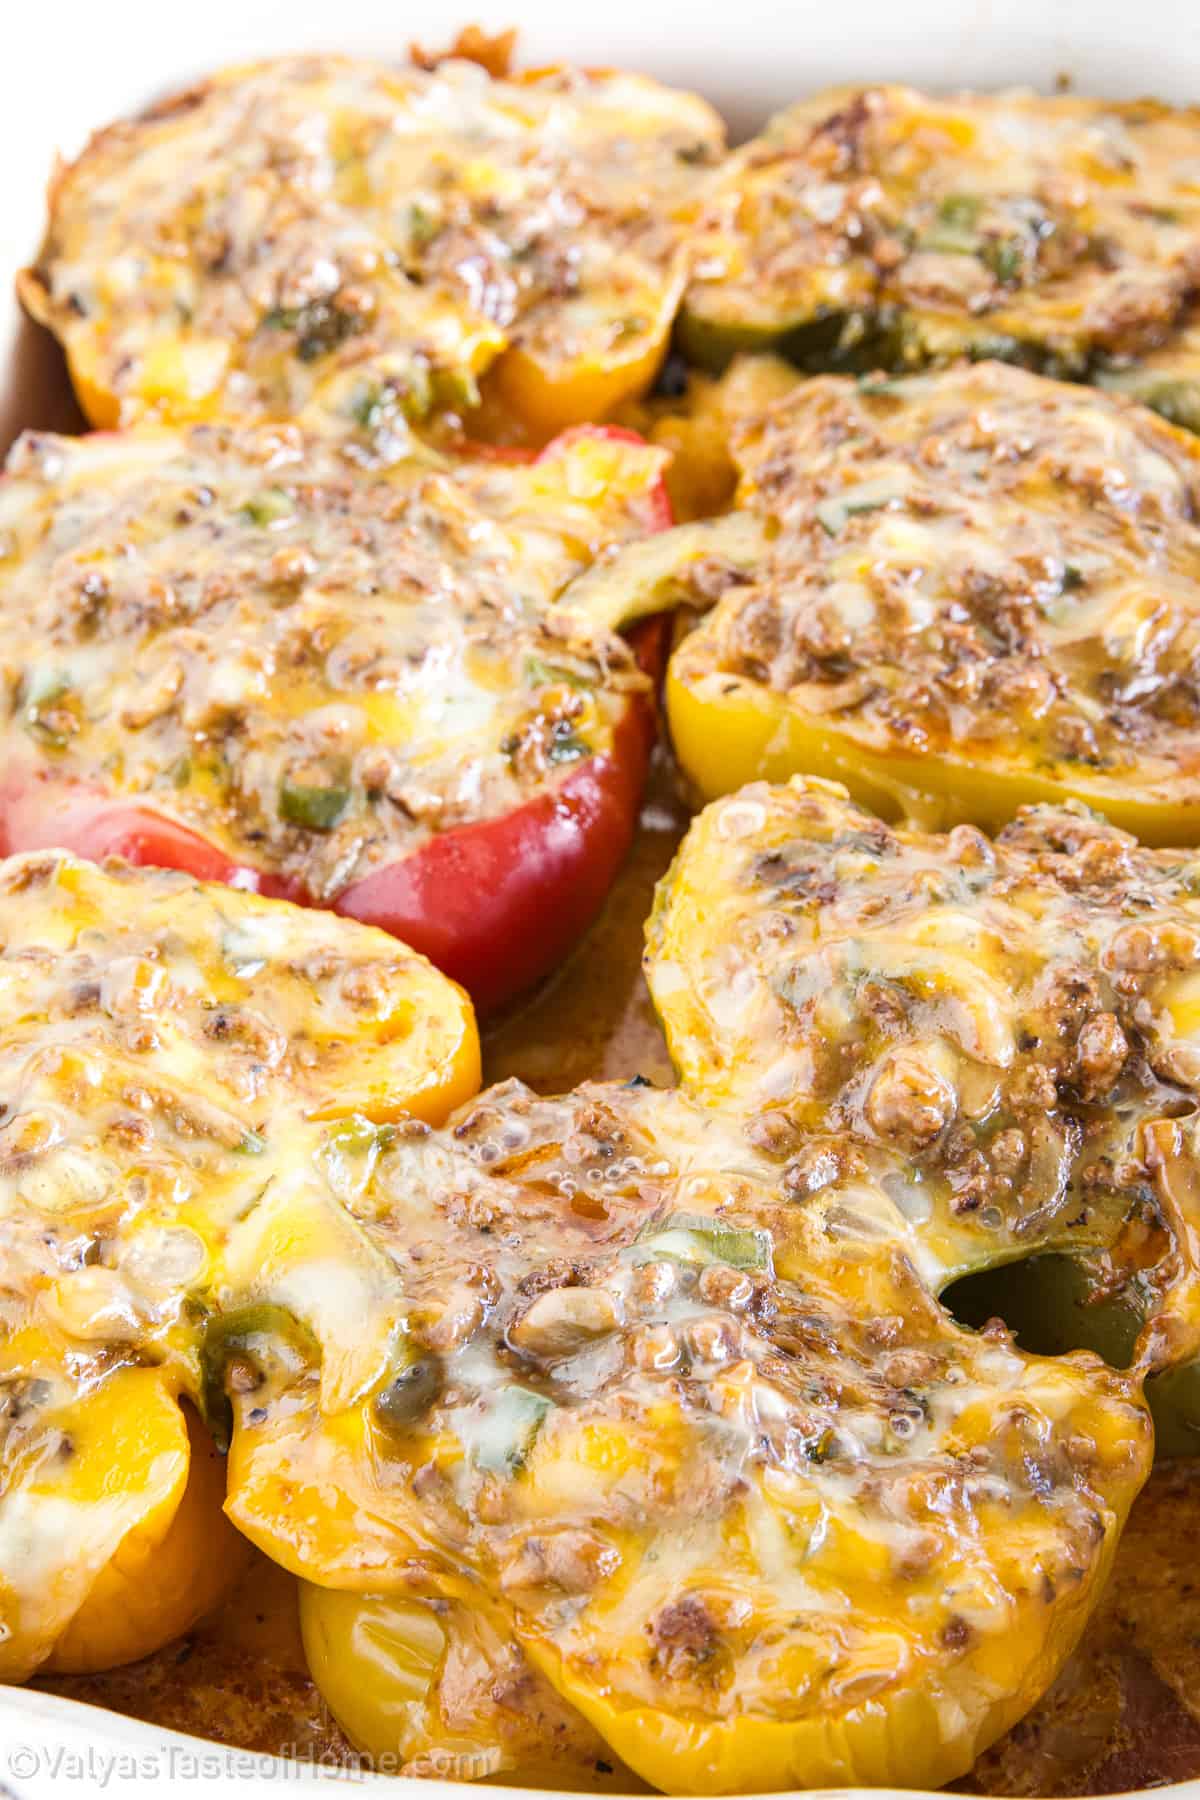 Stuffed bell peppers are a classic dish that can be enjoyed as a main course or side dish.